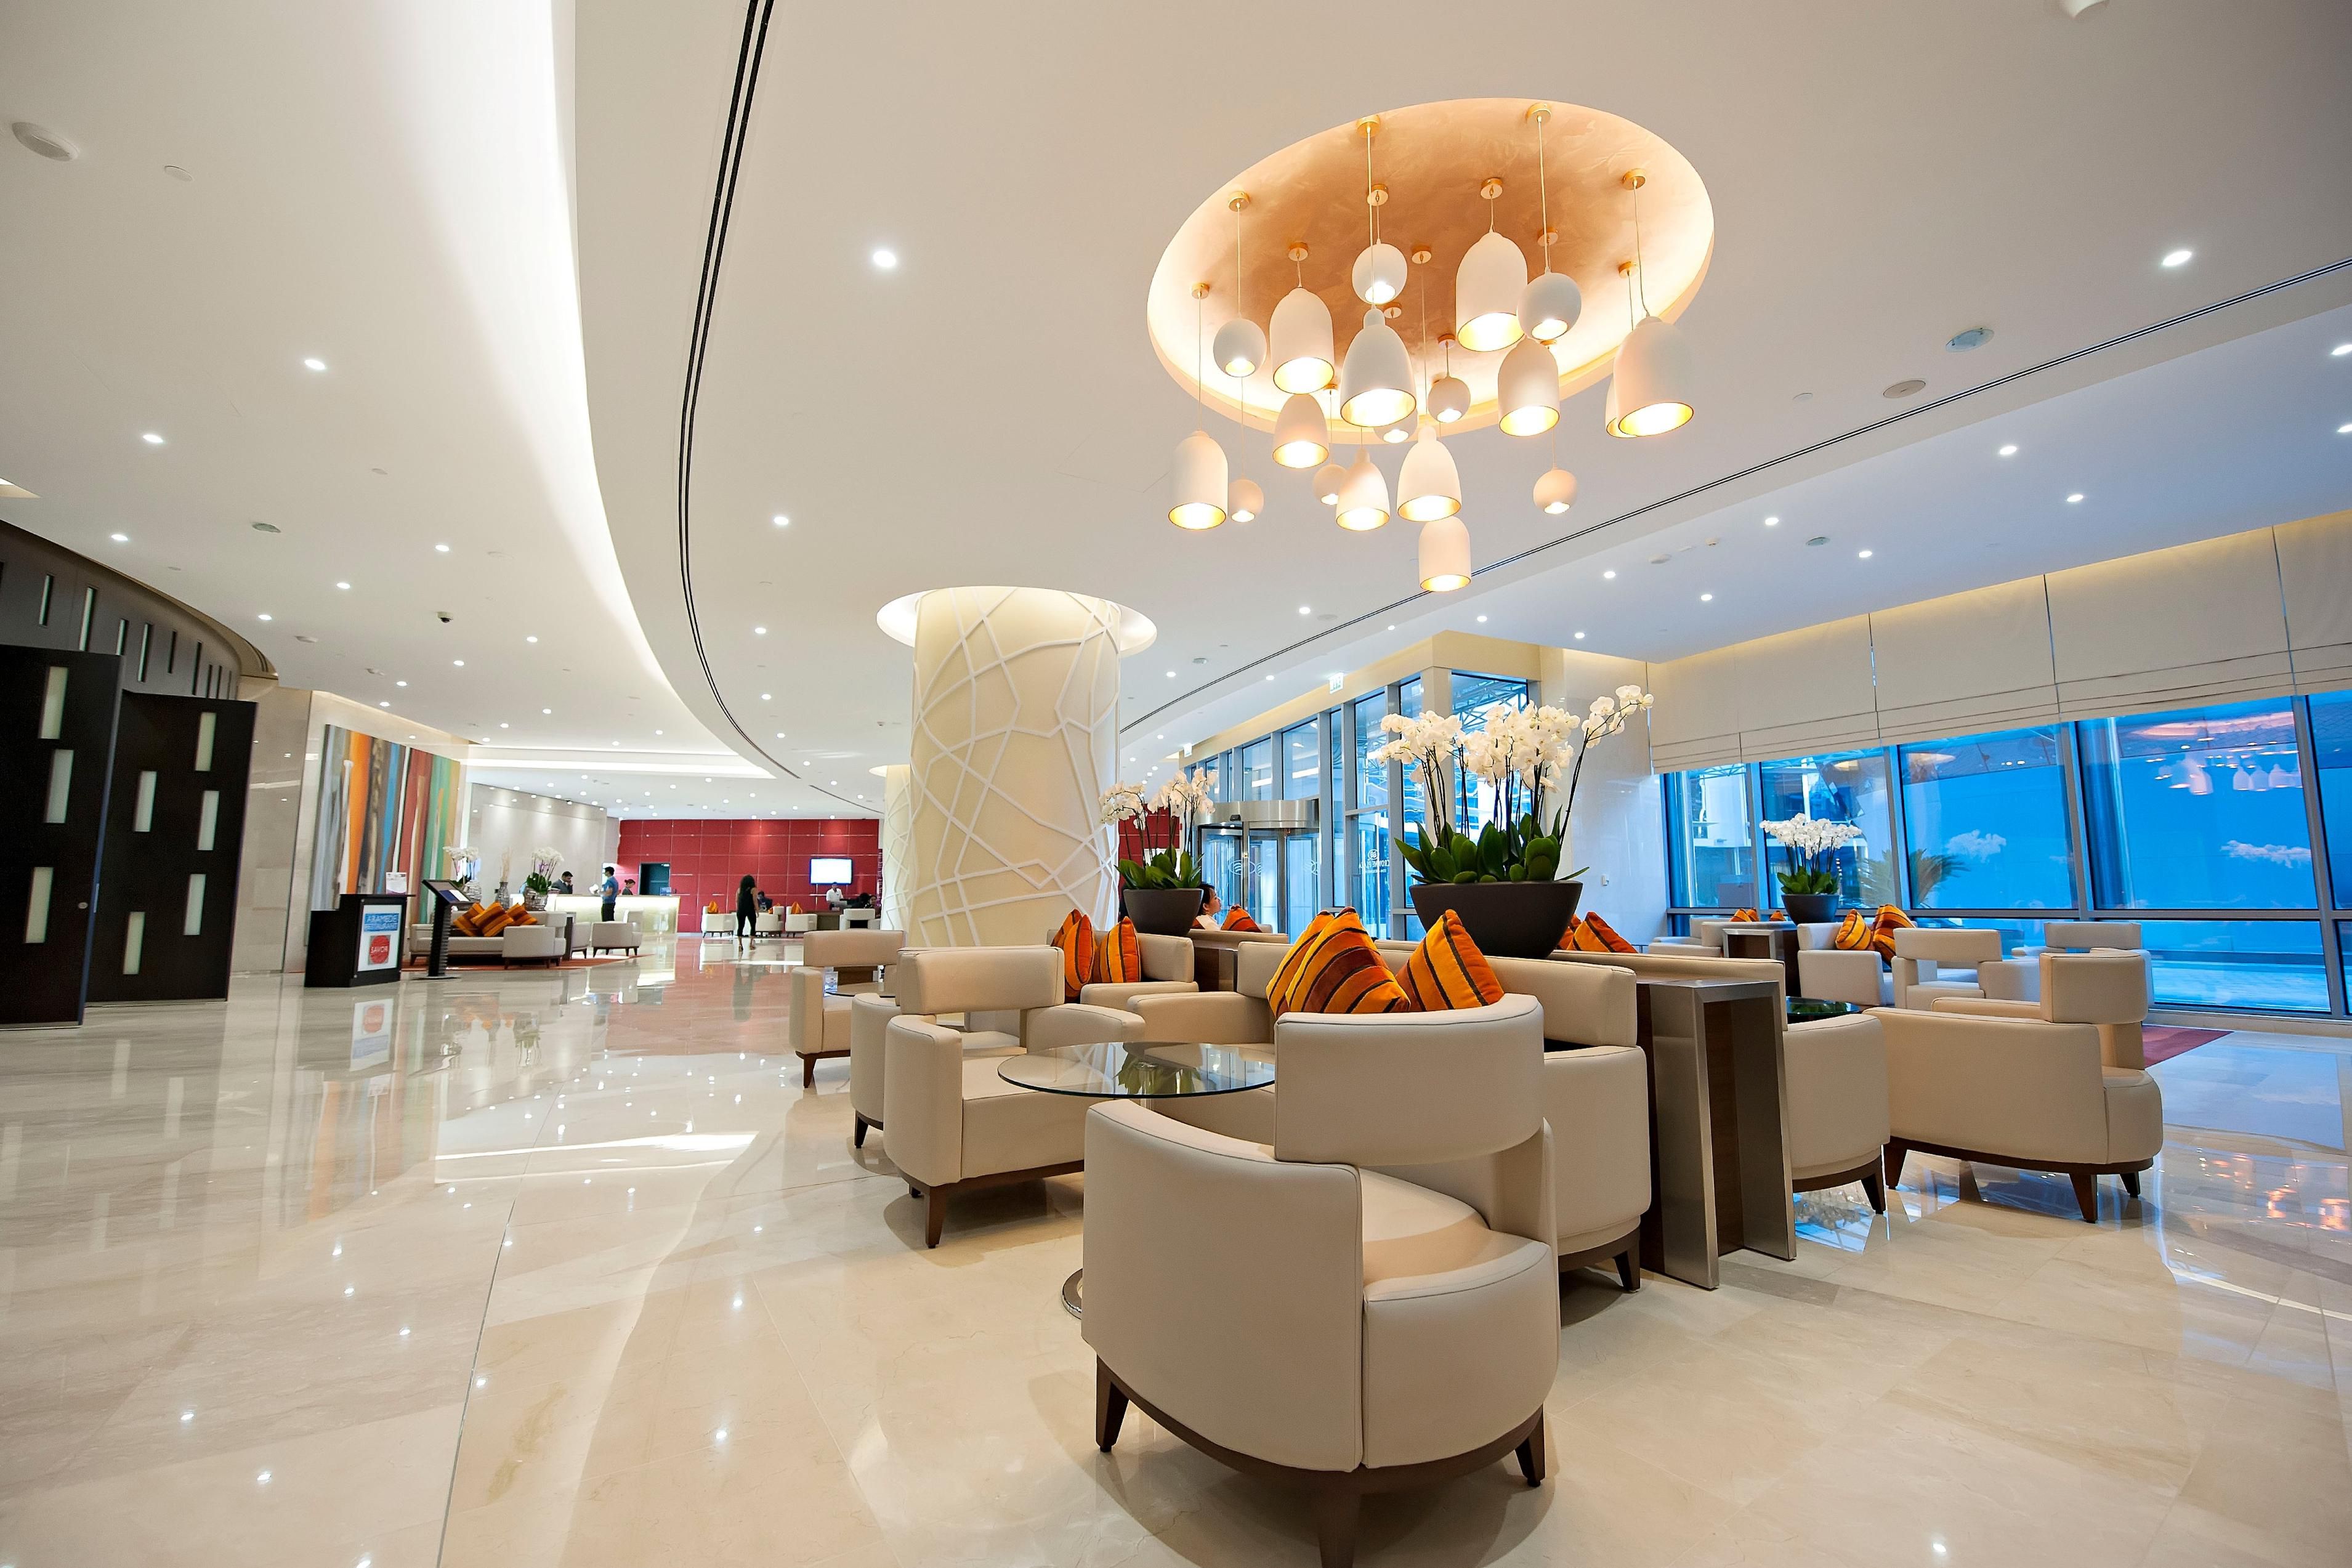 Our bright and airy hotel lobby welcomes you